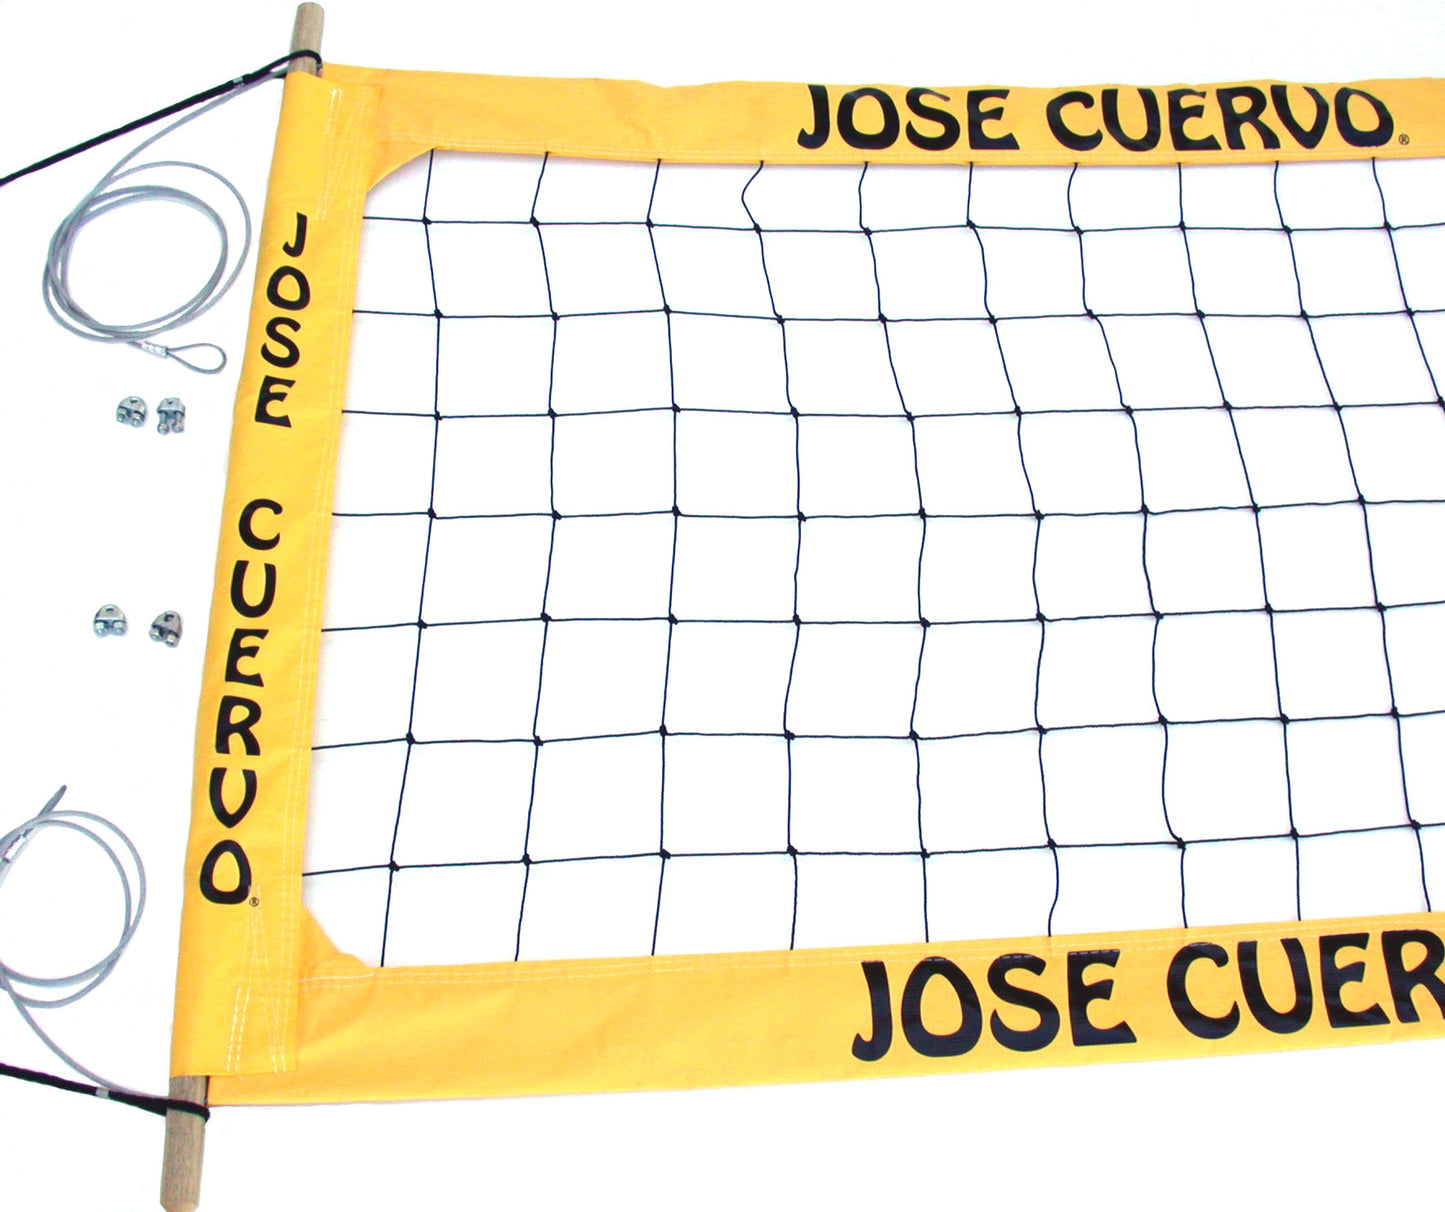 JCPRO-Jose Cuevo Logo Professional Volleyball  Net, Aircraft Cable Top & Bottom, 4-inch Yellow Tapes